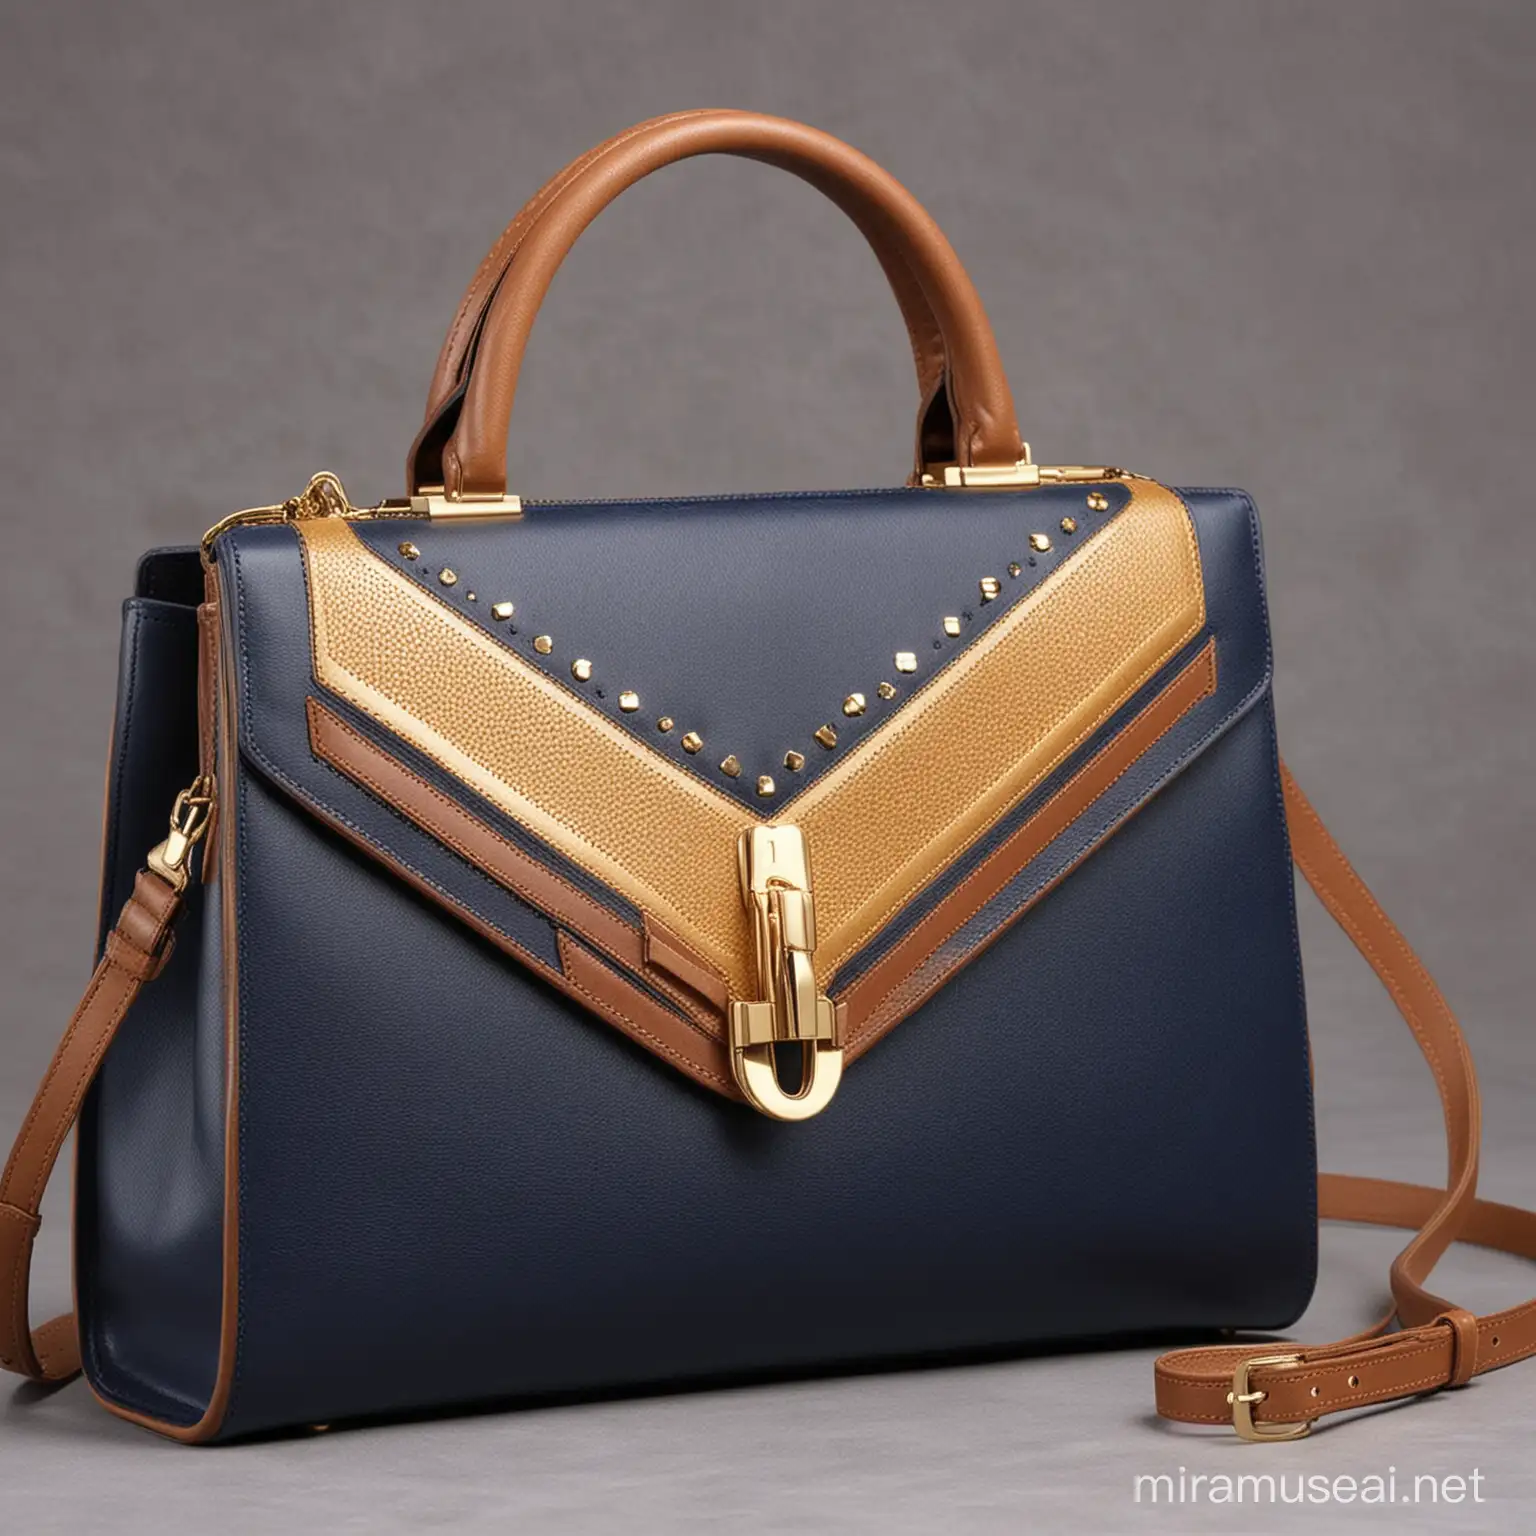  classy and elegant. Navy blue, Brown and Gold Leather Purse bag Design with design